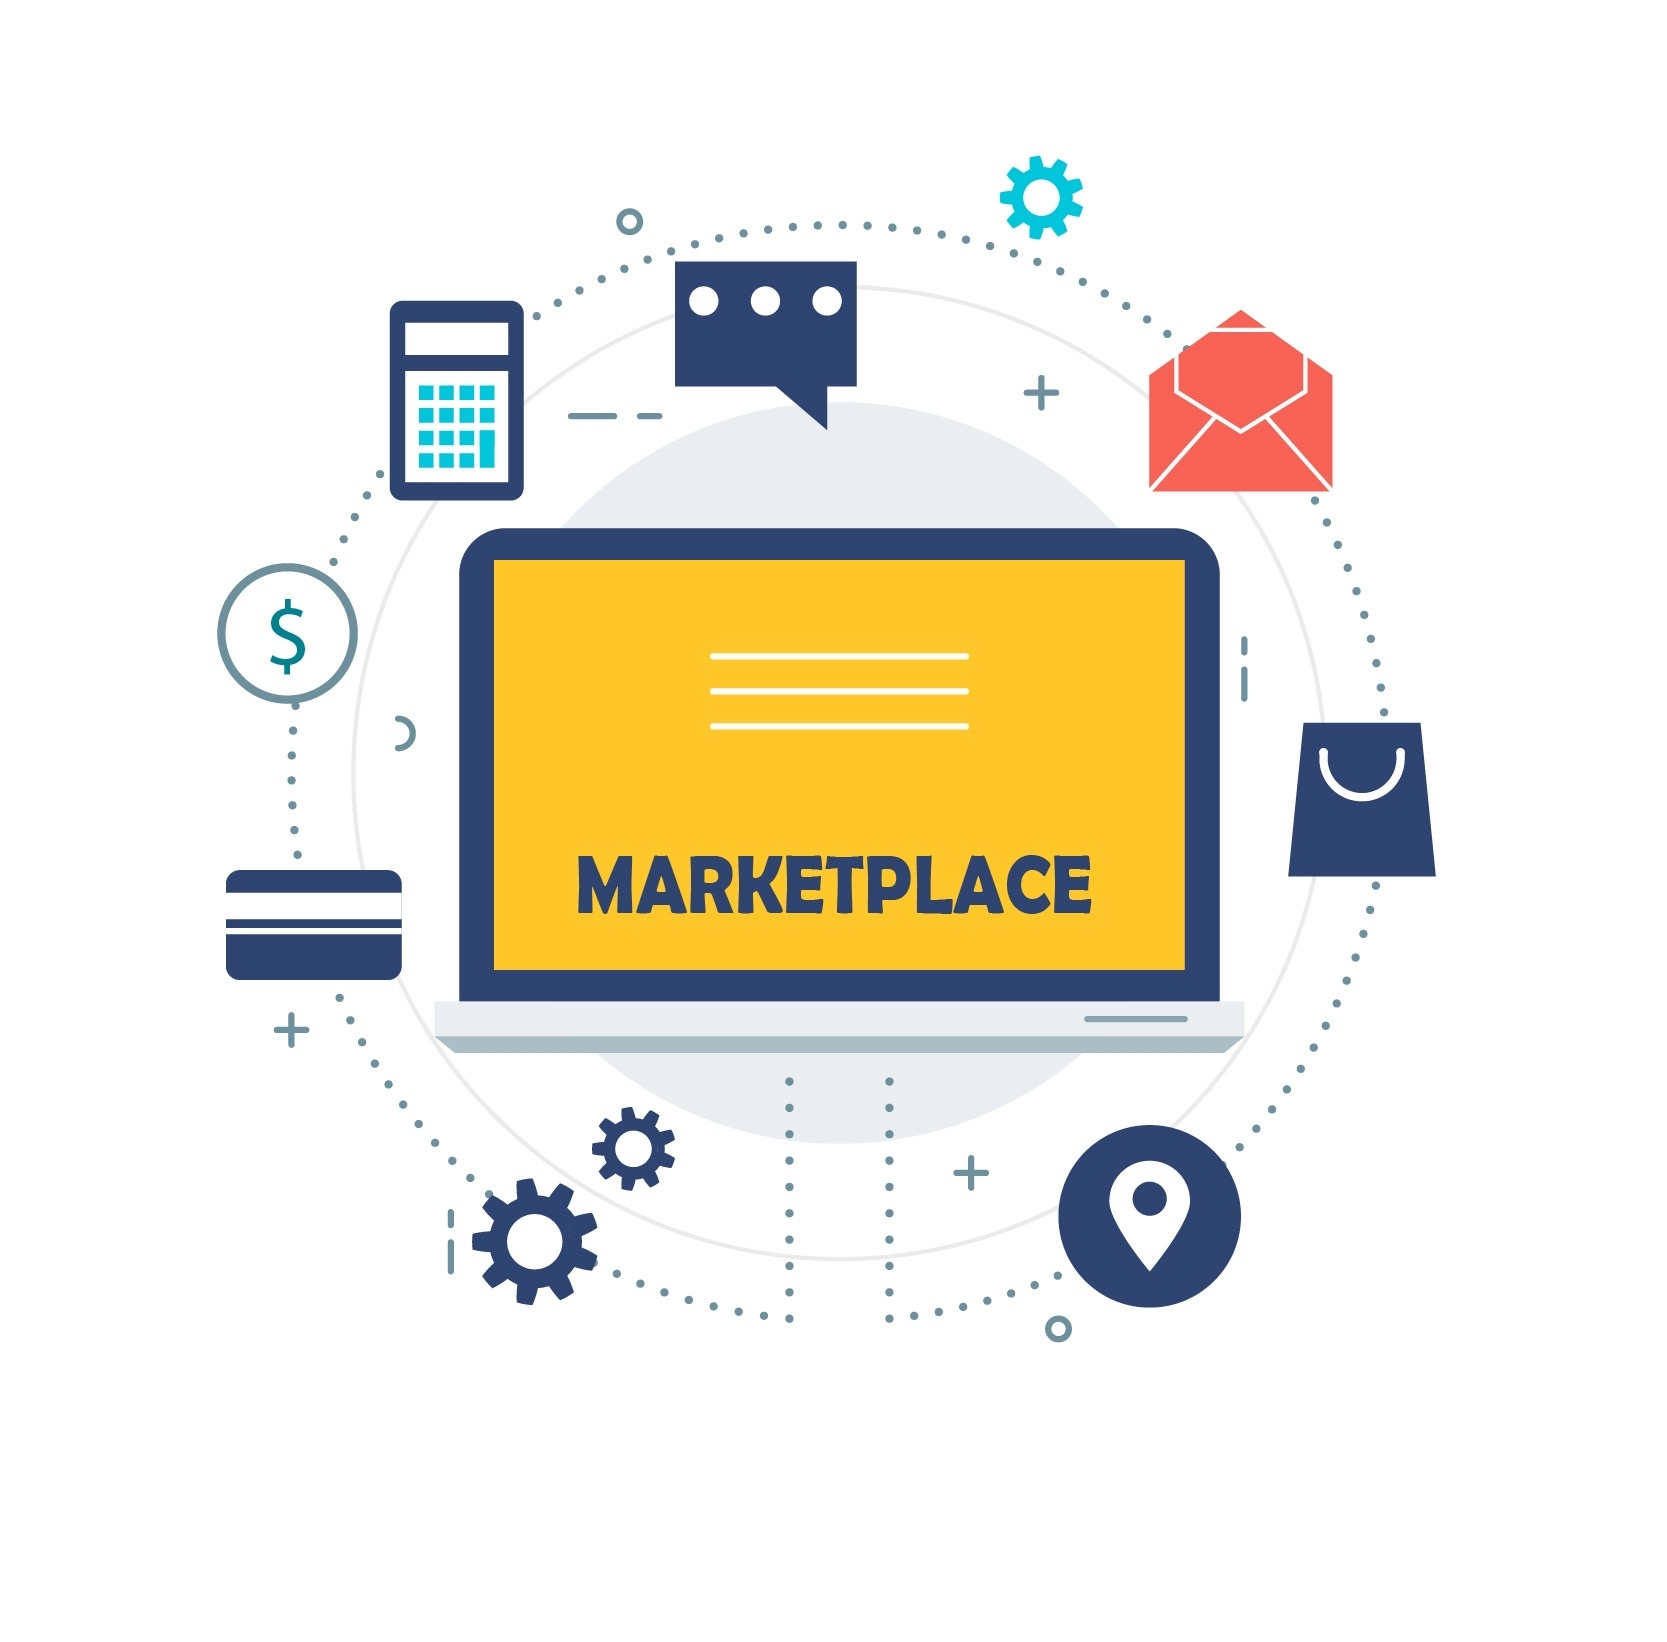 A classifieds marketplace for the better – Changing the structure from old technologies to latest advancements by conducting a  fully fledged digital improvement